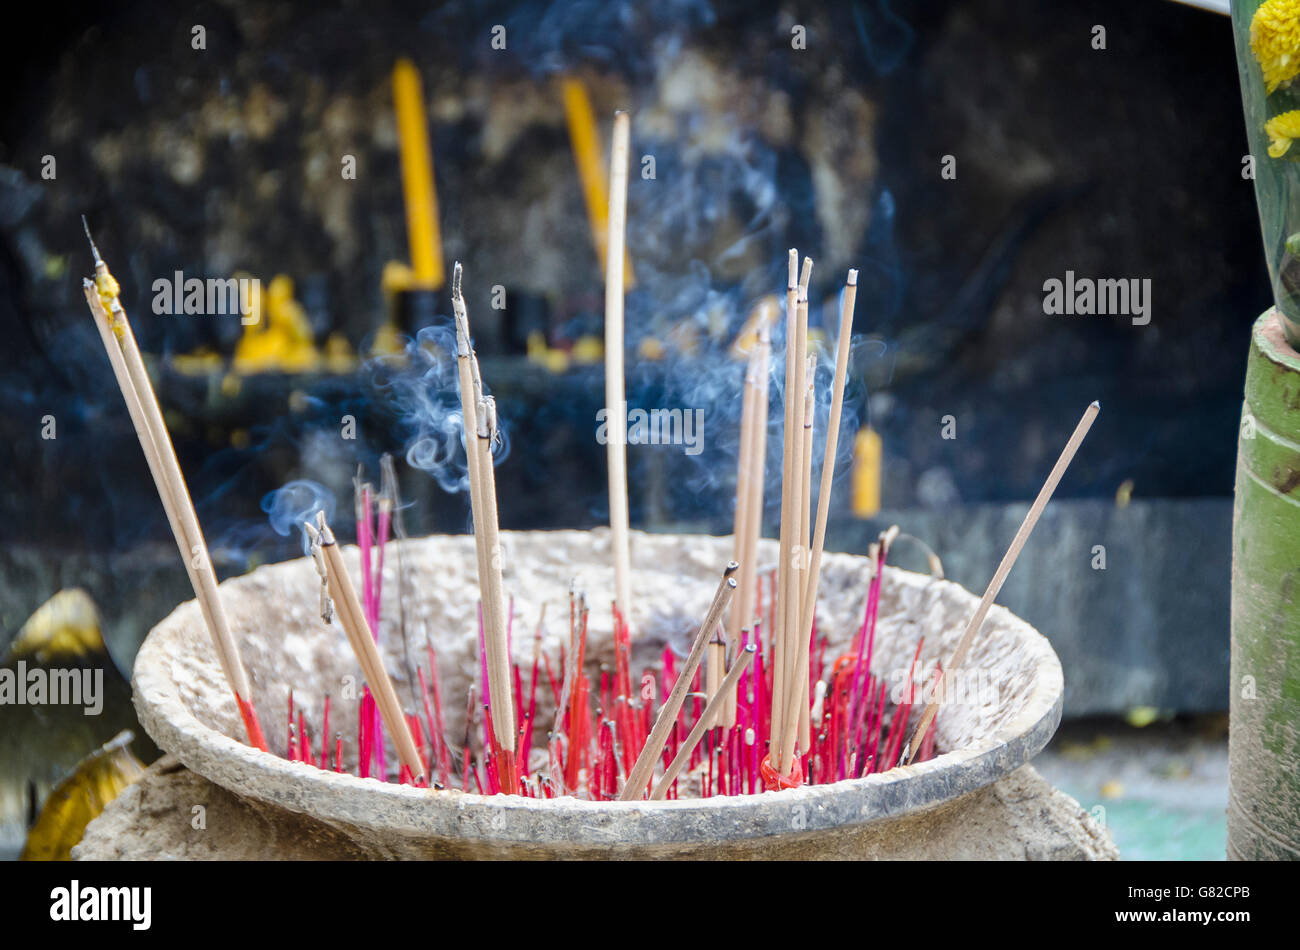 Smoke emitting from incense sticks in container at temple Stock Photo